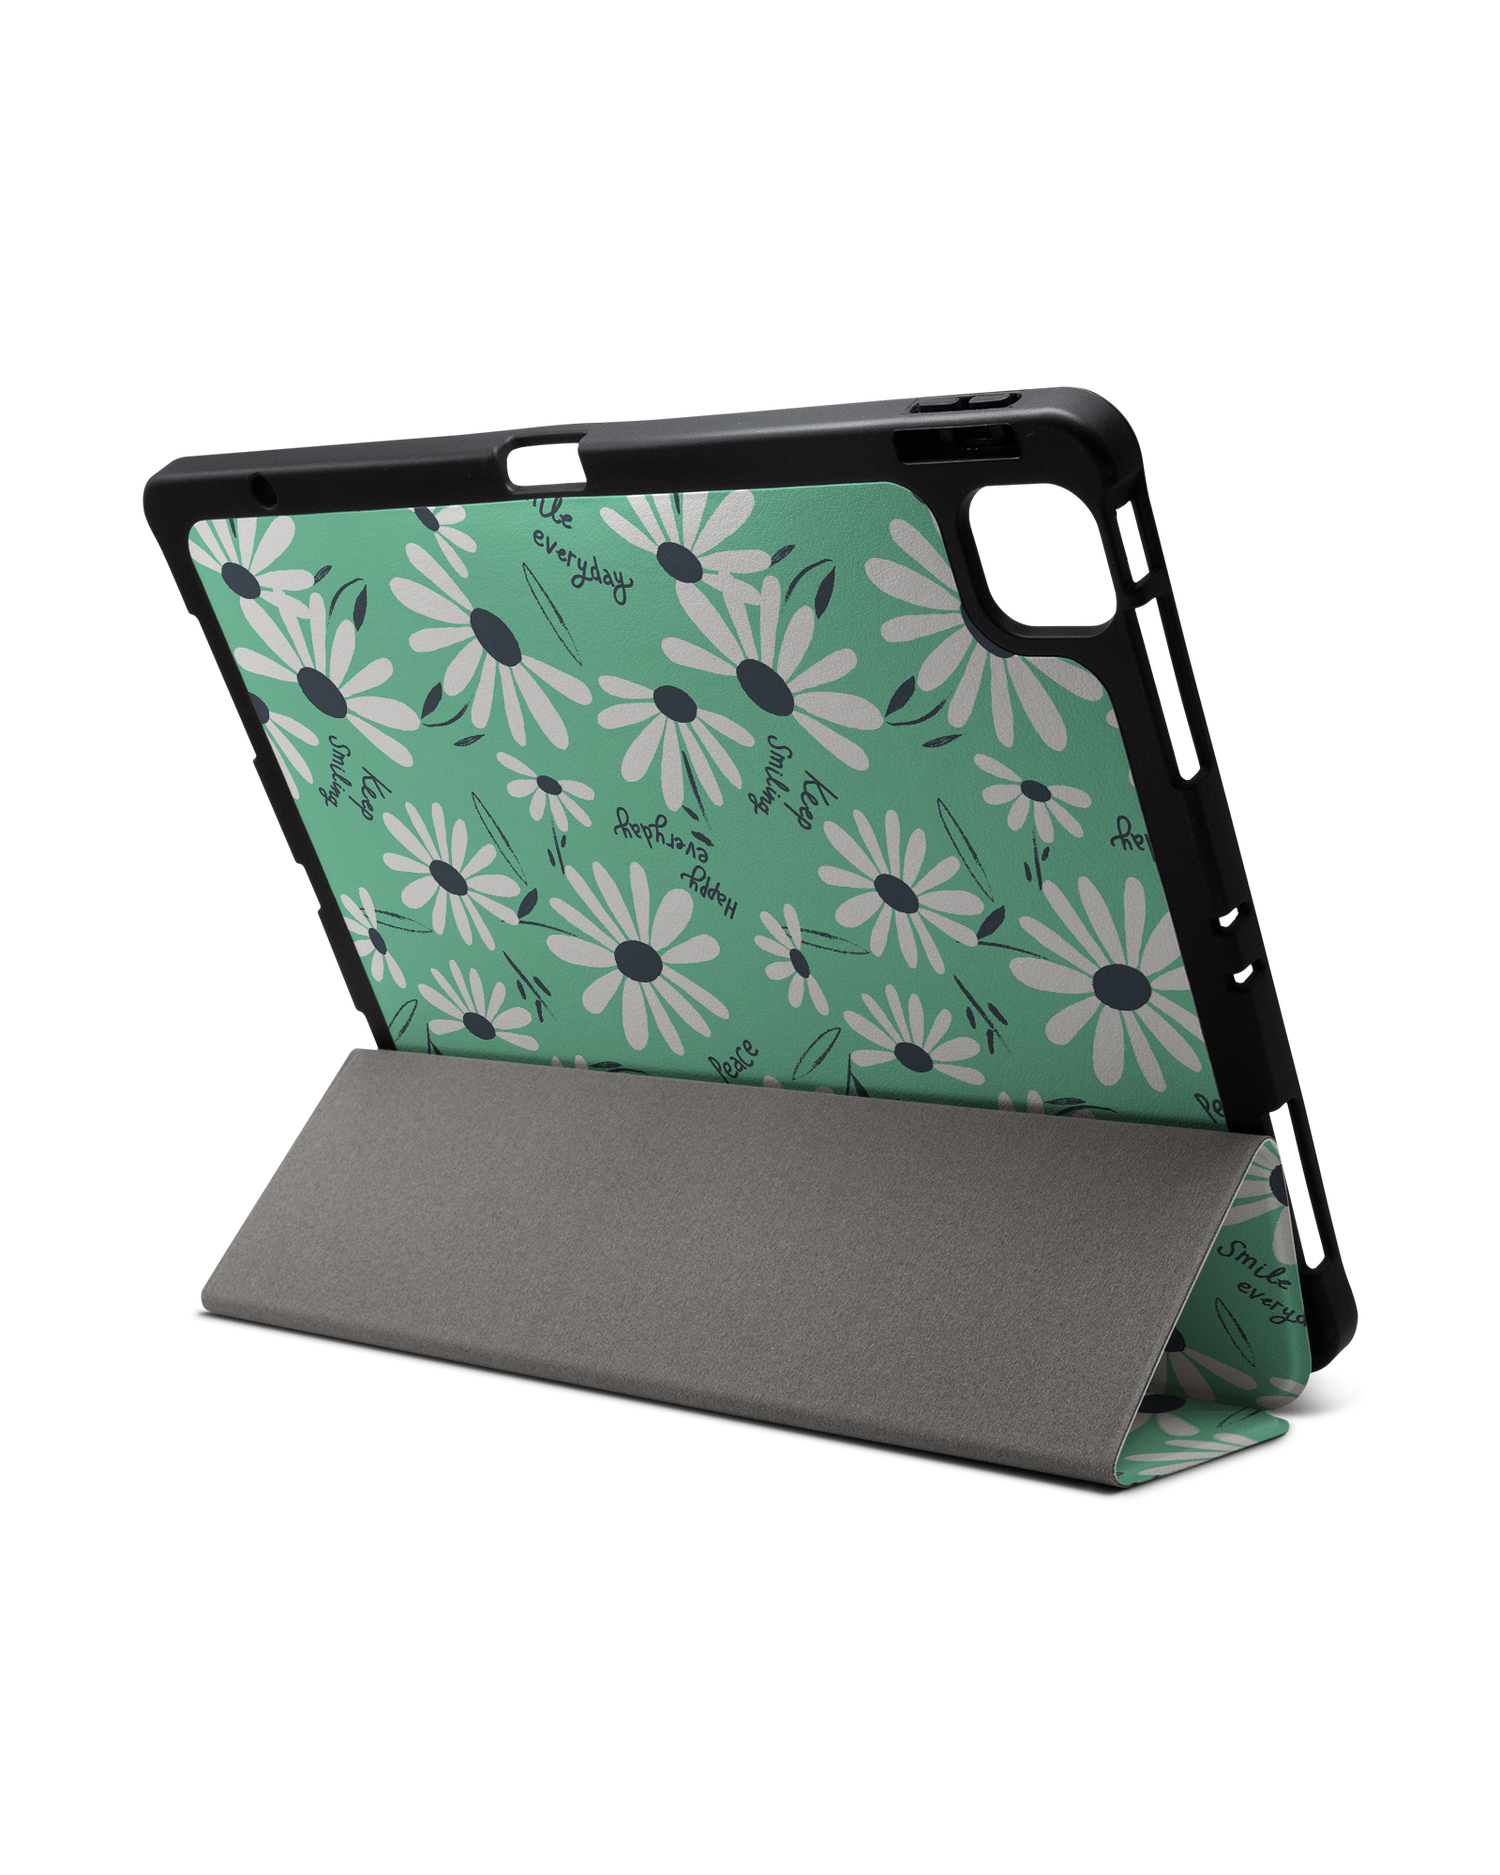 Positive Daisies iPad Case with Pencil Holder for Apple iPad Pro 6 12.9